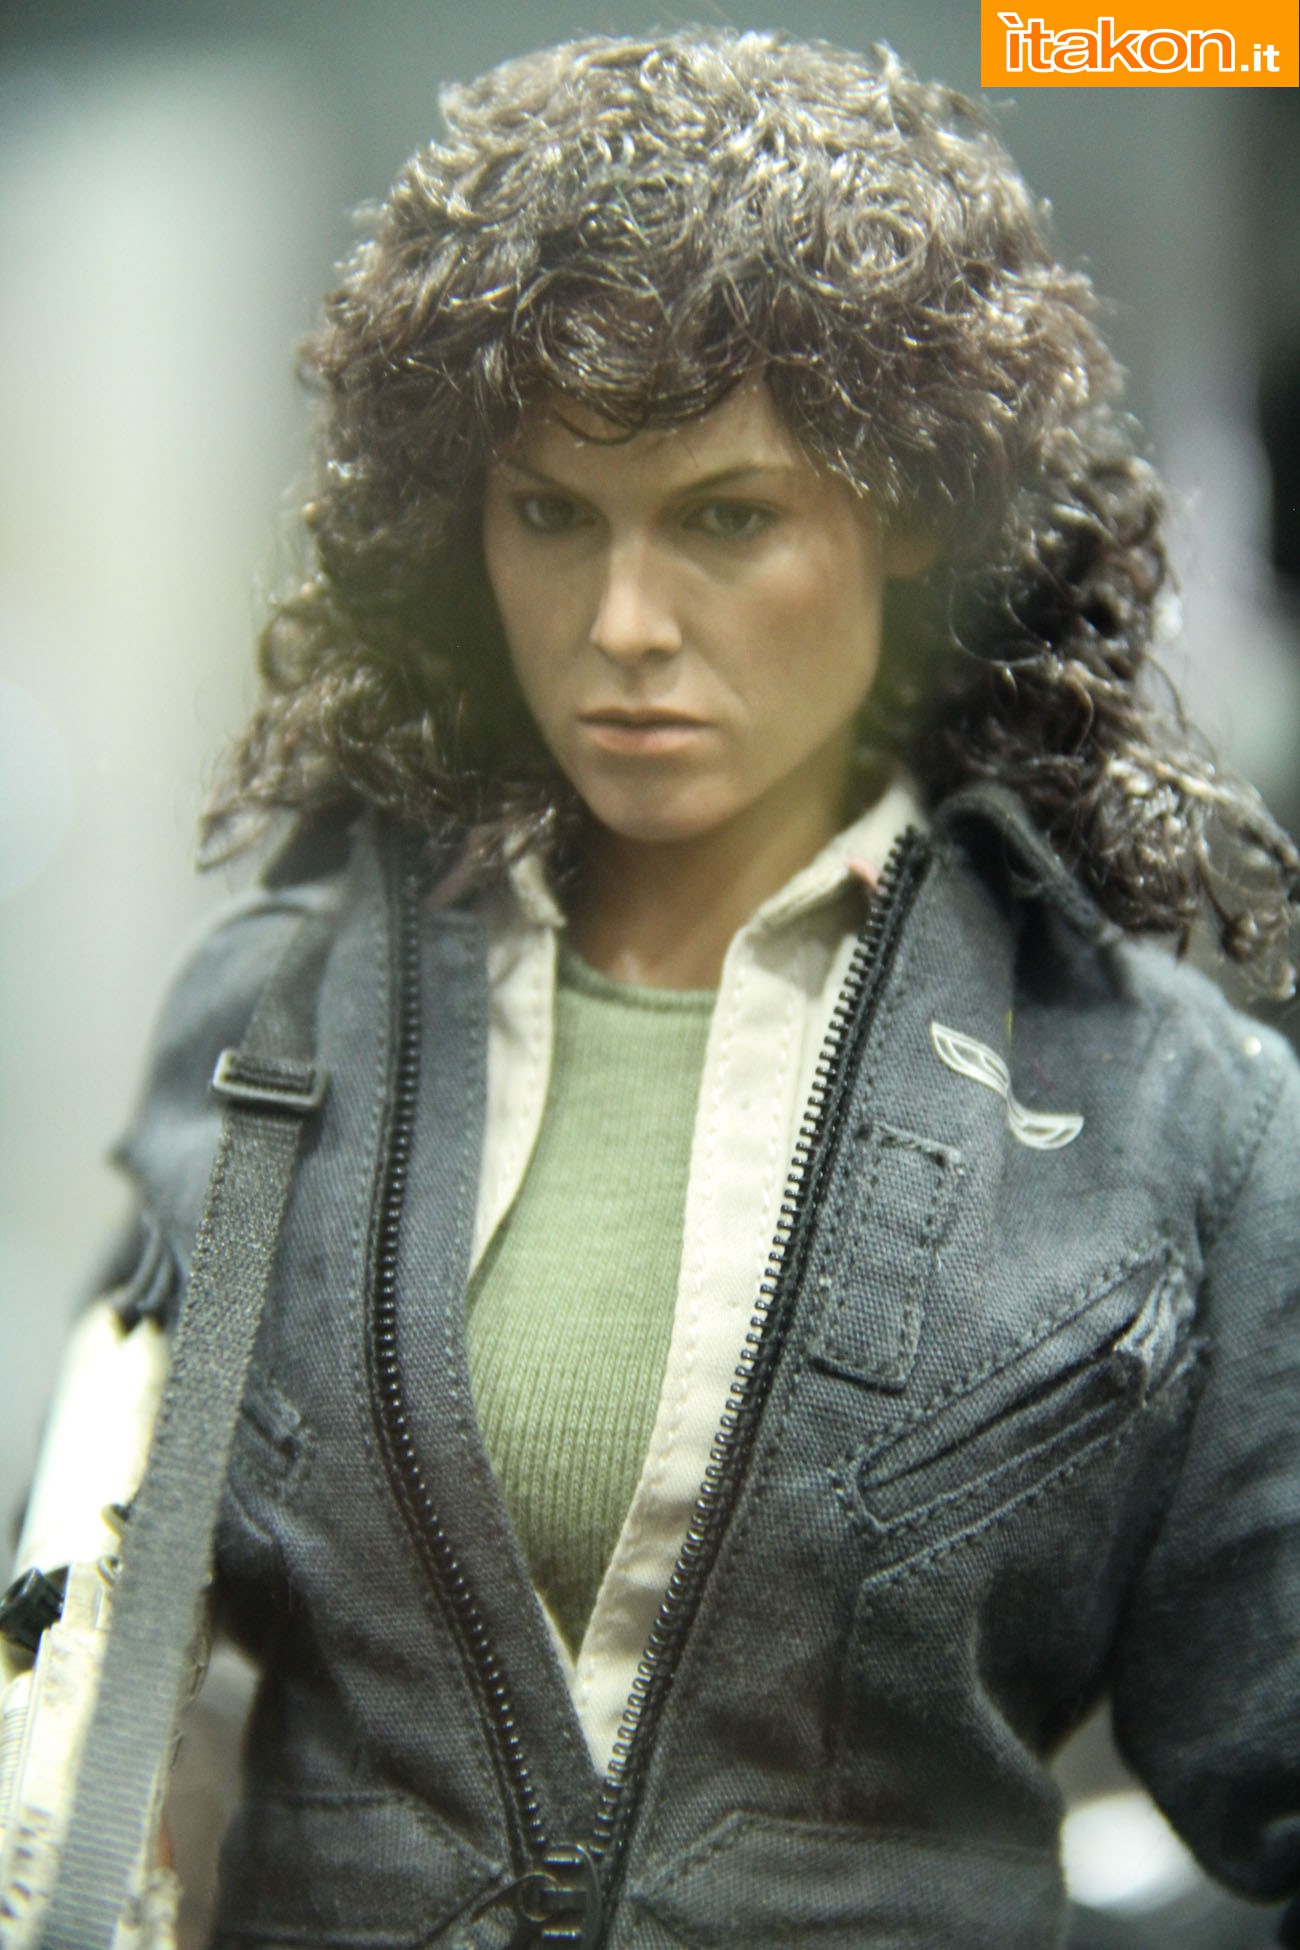 sdcc2014-hot-toys-booth-38.jpg